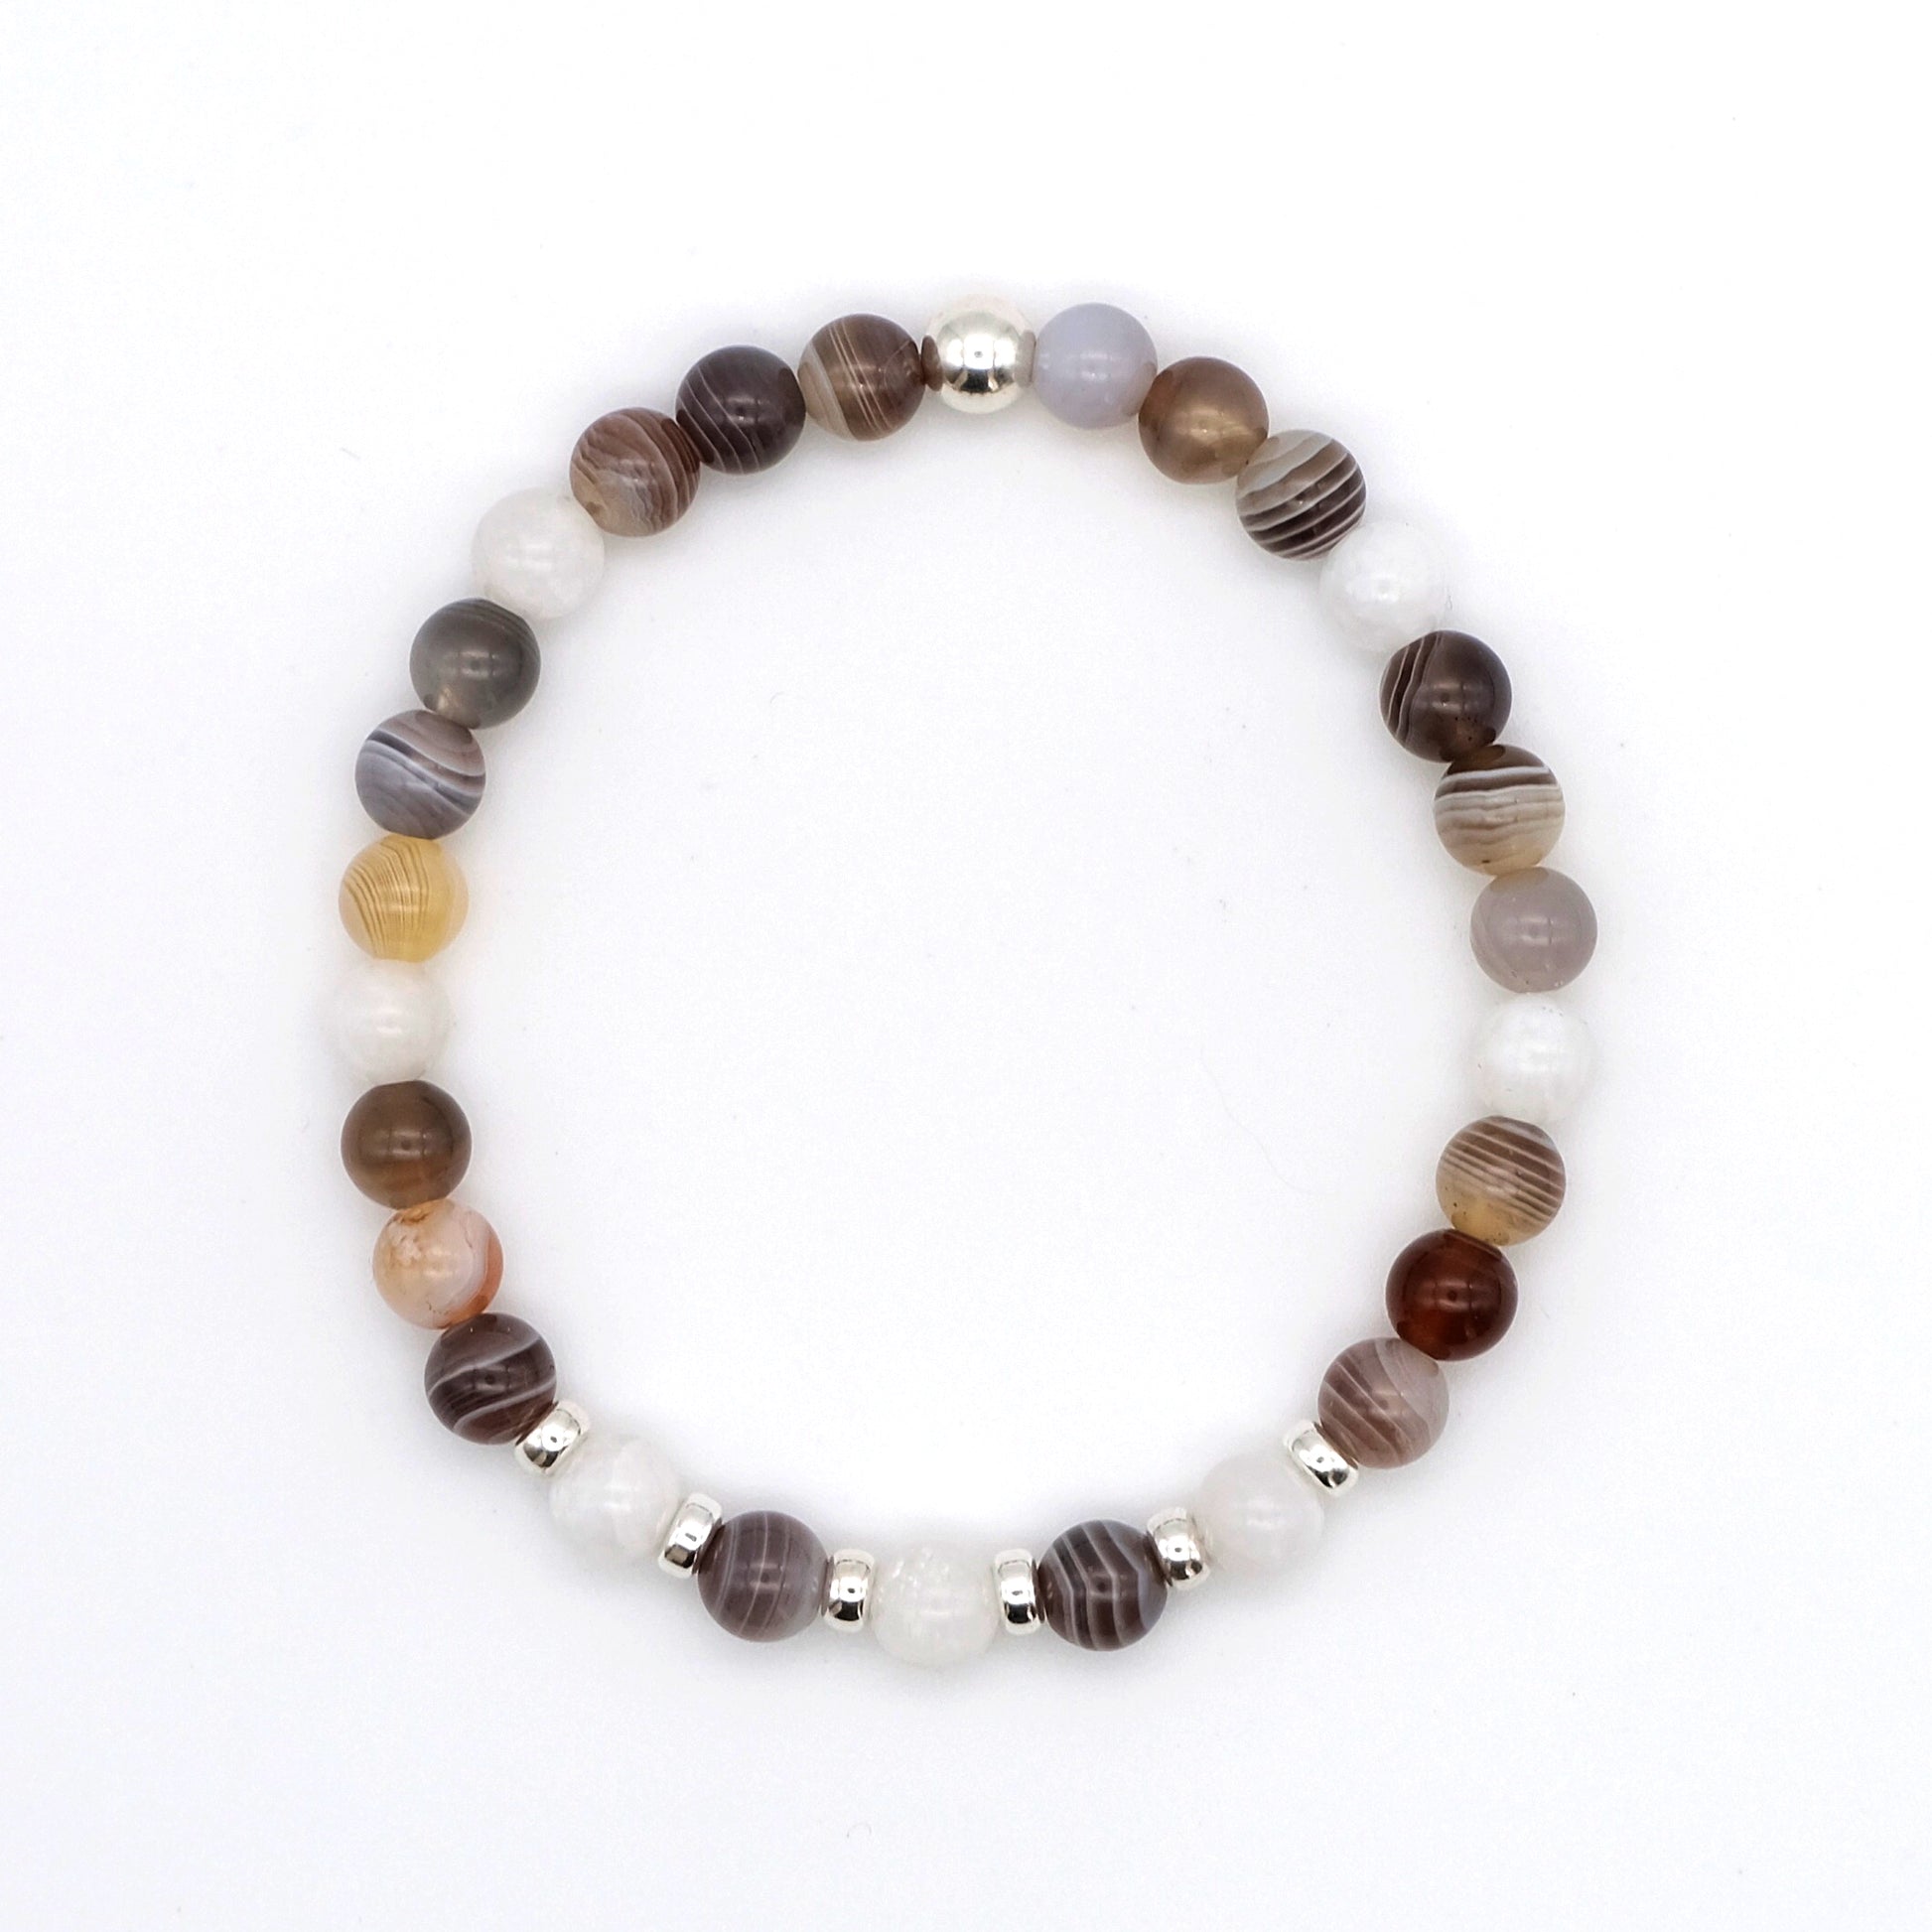 Botswana Agate and Moonstone gemstone bracelet in 6mm beads with silver accessories from above